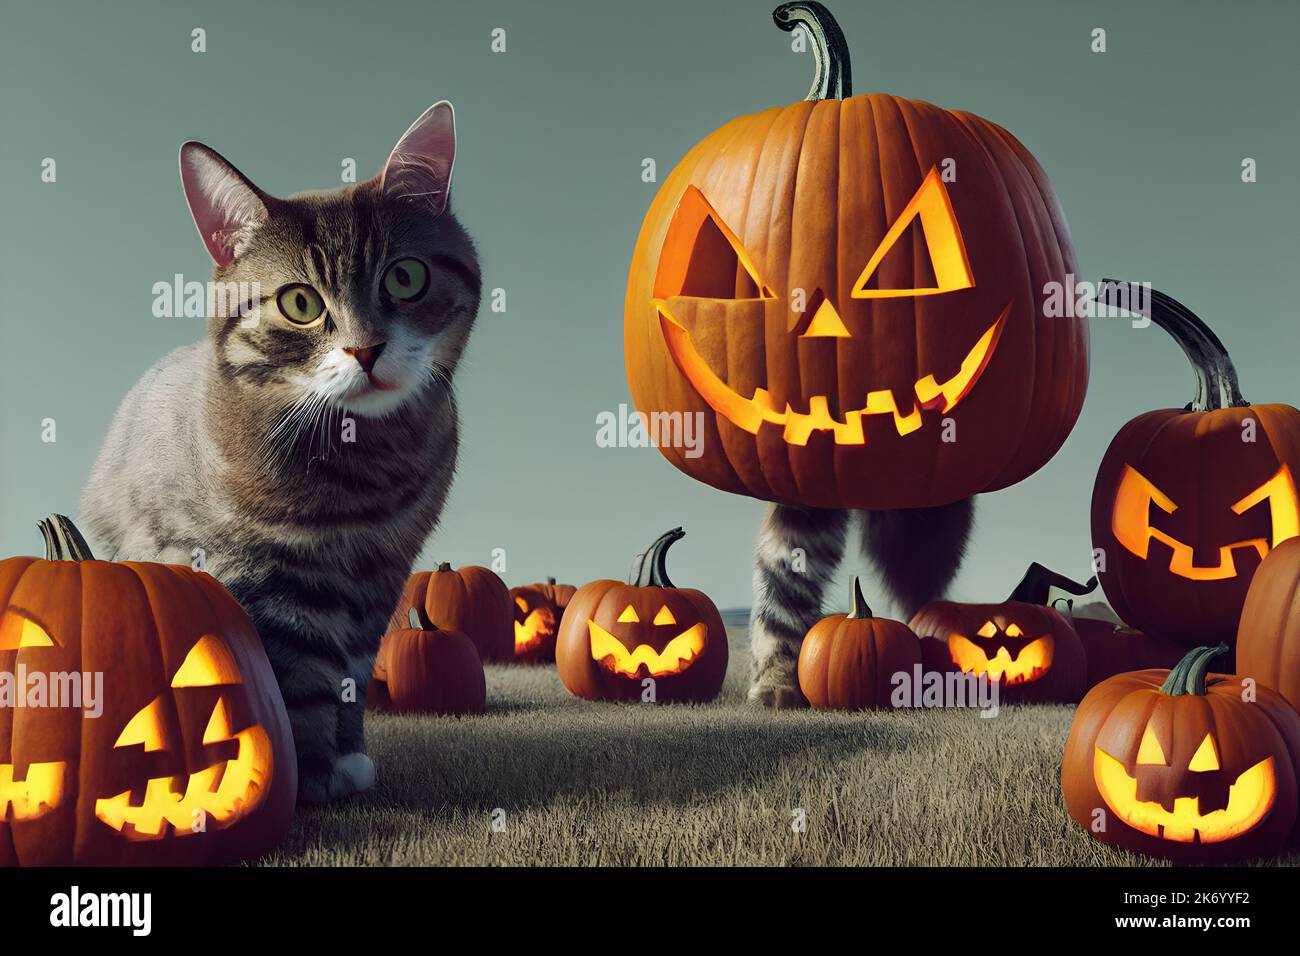 A cat dressed as a pumpkin, creeps up on a red cat who is not expecting anything. A Halloween game of hide and seek. Stock Photo